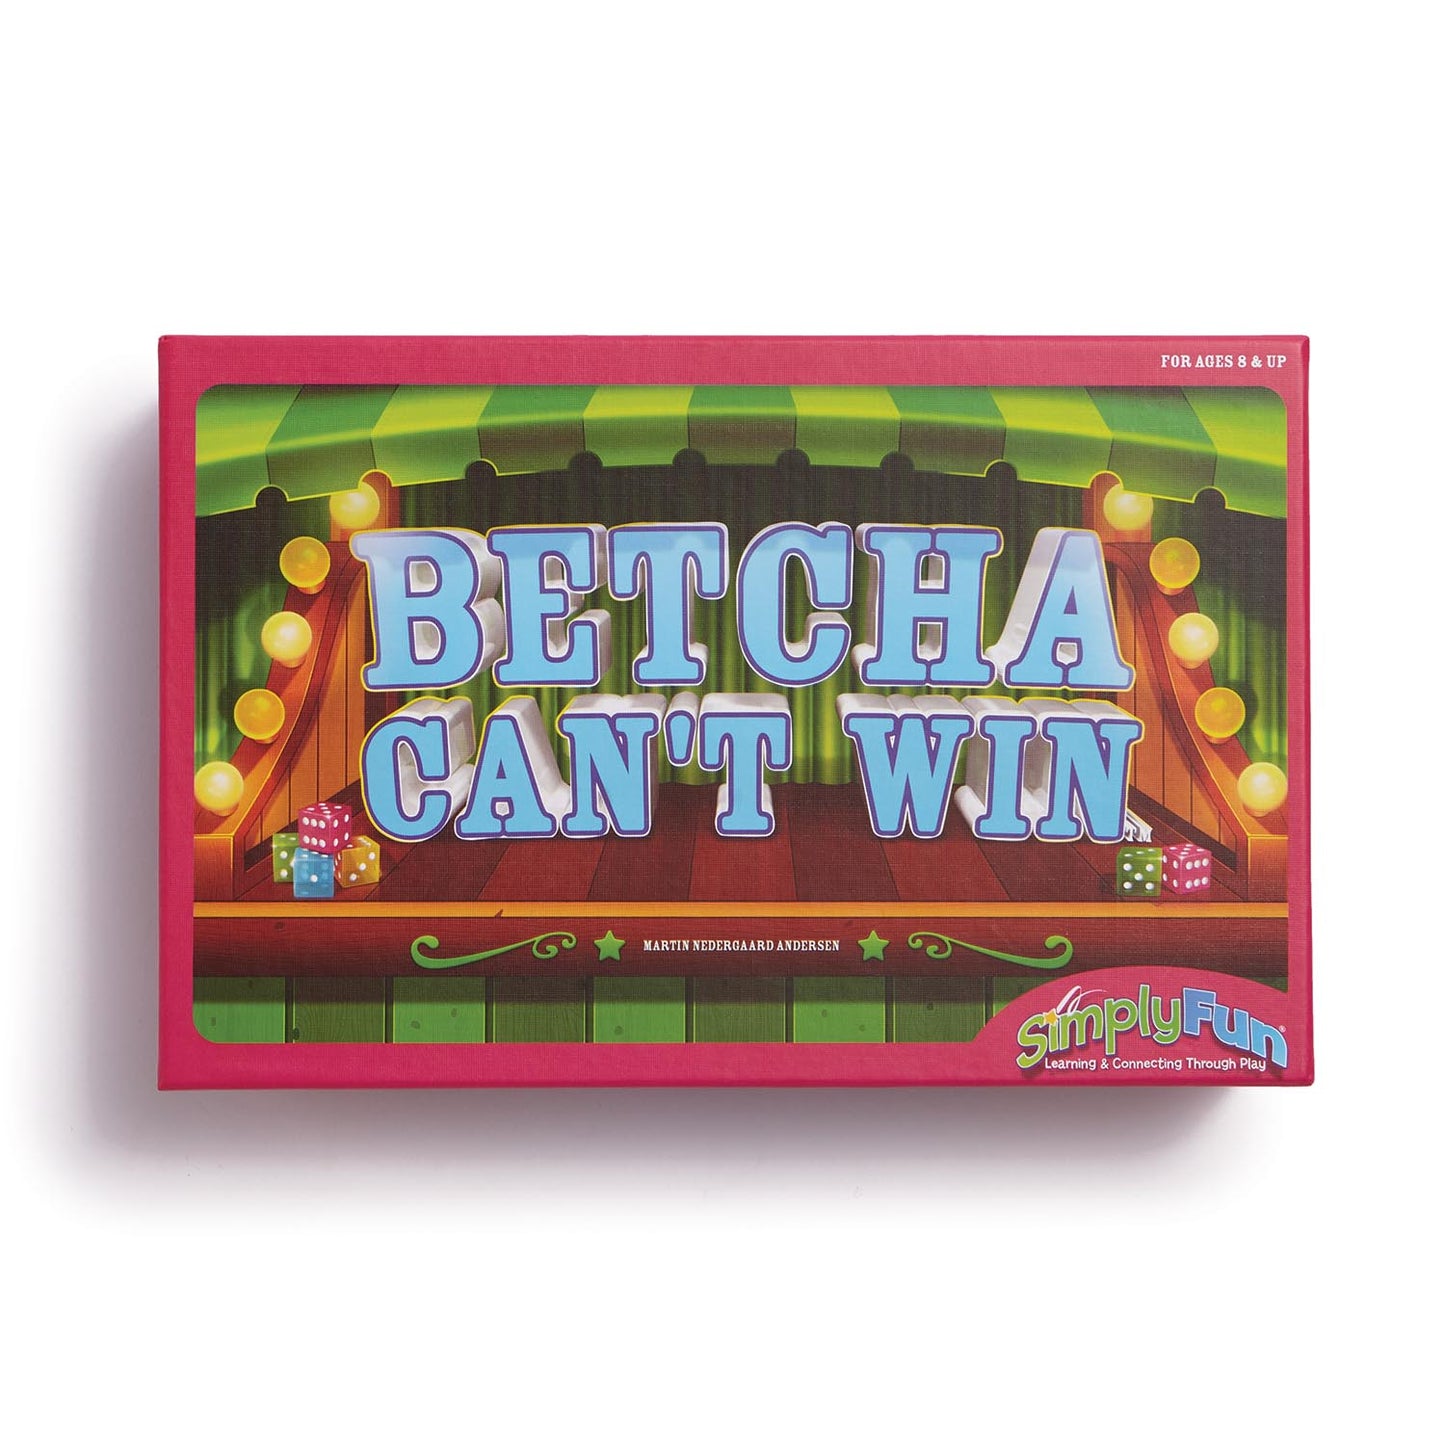 Betcha Can't Win by SimplyFun is a fun math game for ages 8 and up